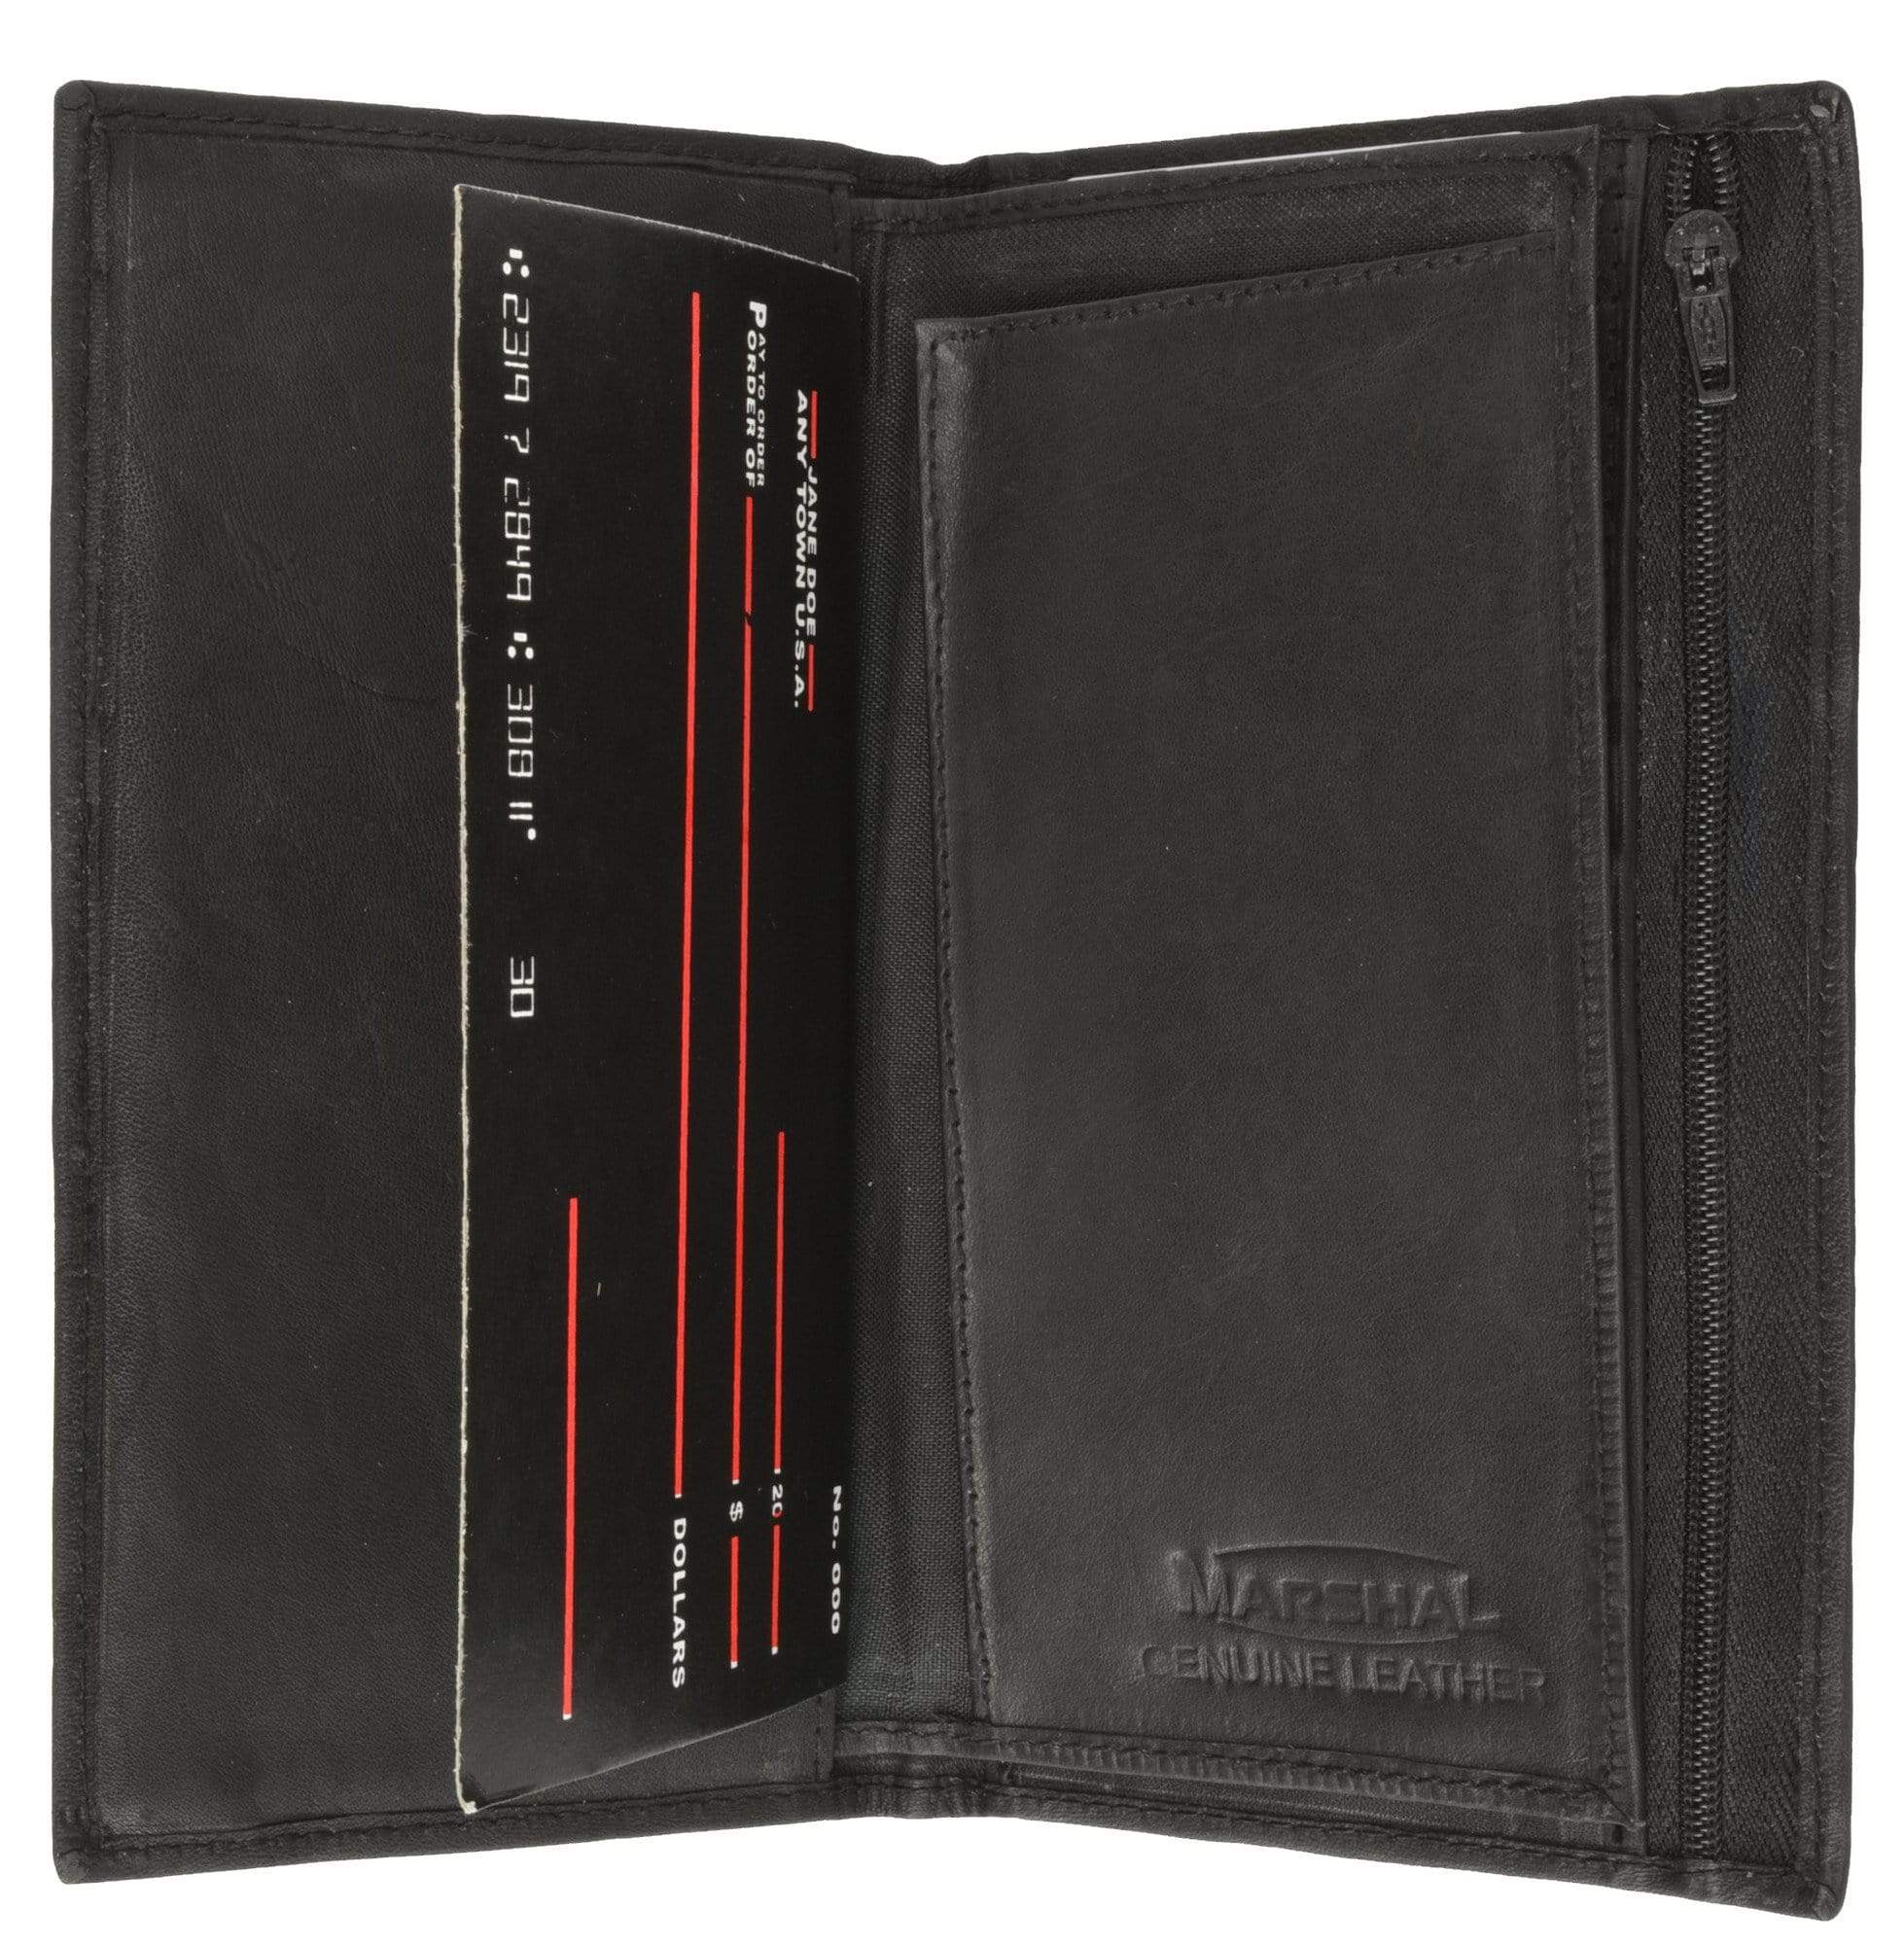 black leather checkbook cover with credit card holder